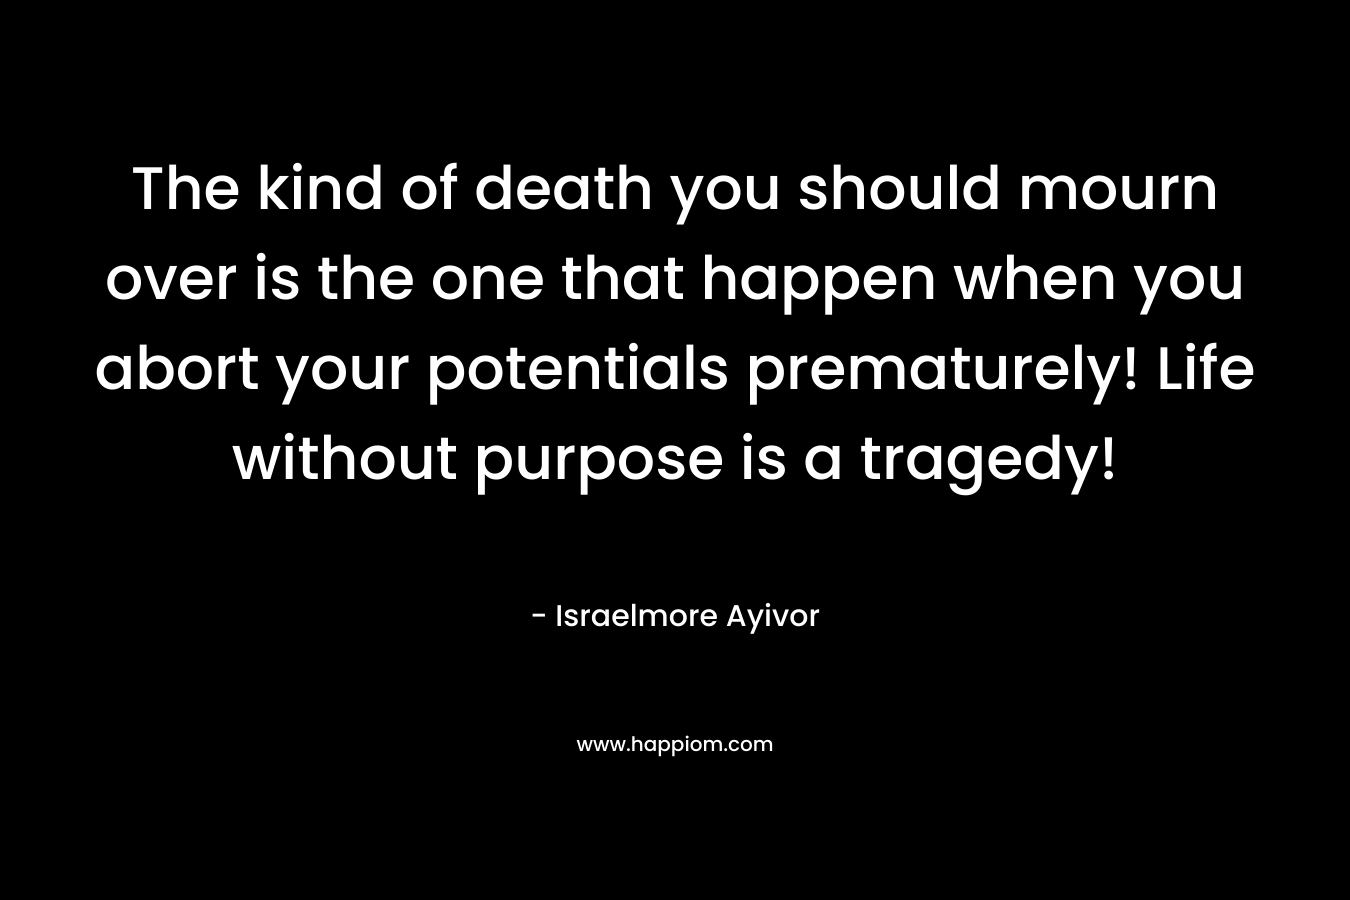 The kind of death you should mourn over is the one that happen when you abort your potentials prematurely! Life without purpose is a tragedy! – Israelmore Ayivor